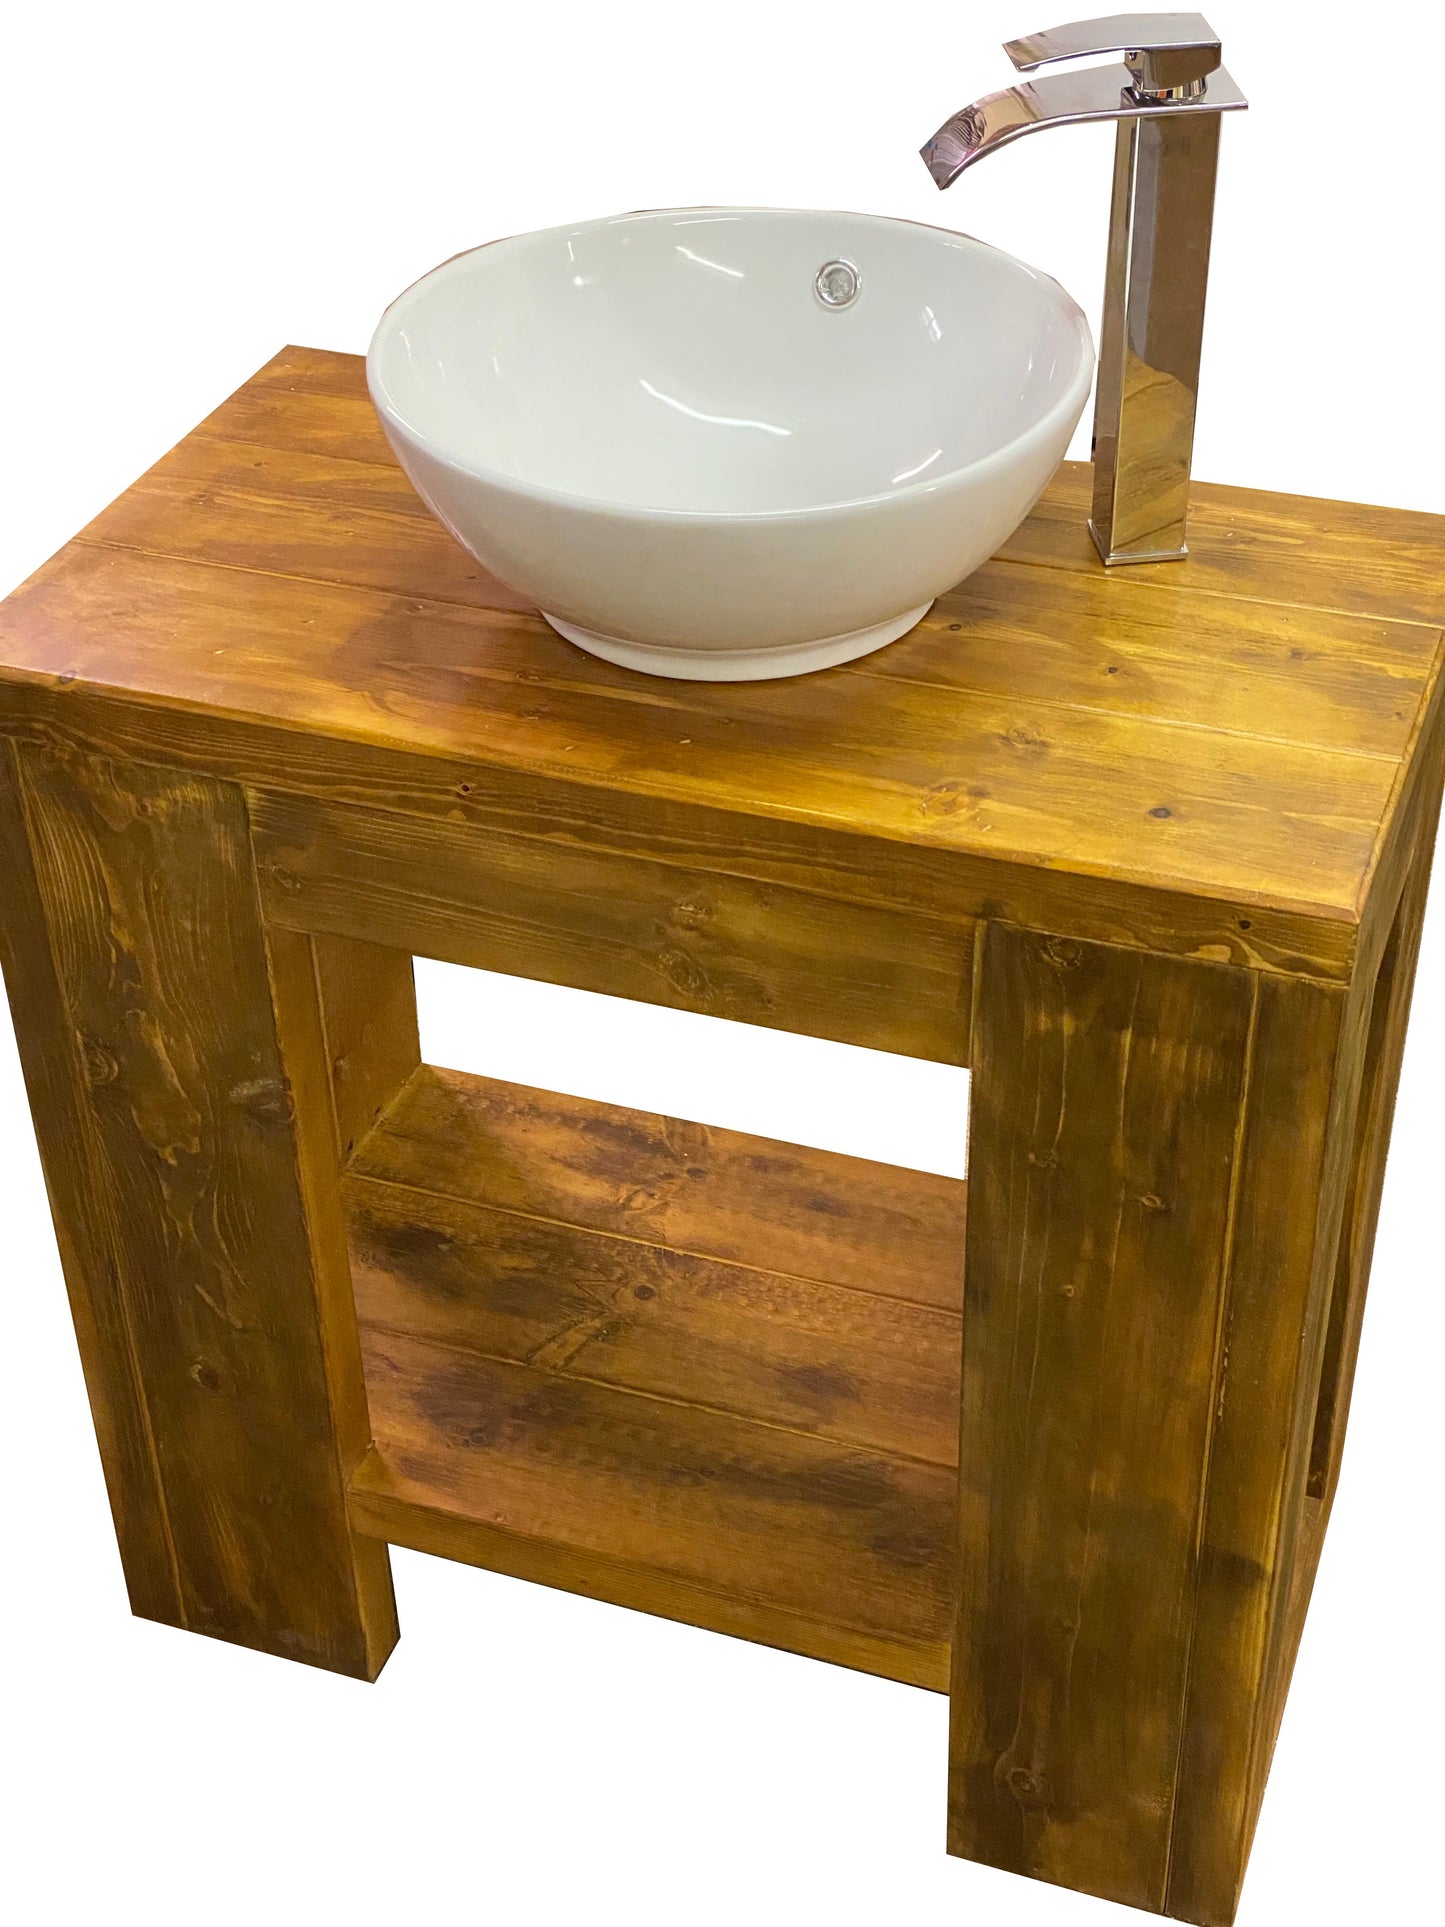 Chunky Wooden Bathroom Basin Unit - solid wood vanity, is a single vanity unit also called a chunky vanity or chunky sink the perfect bathroom sink